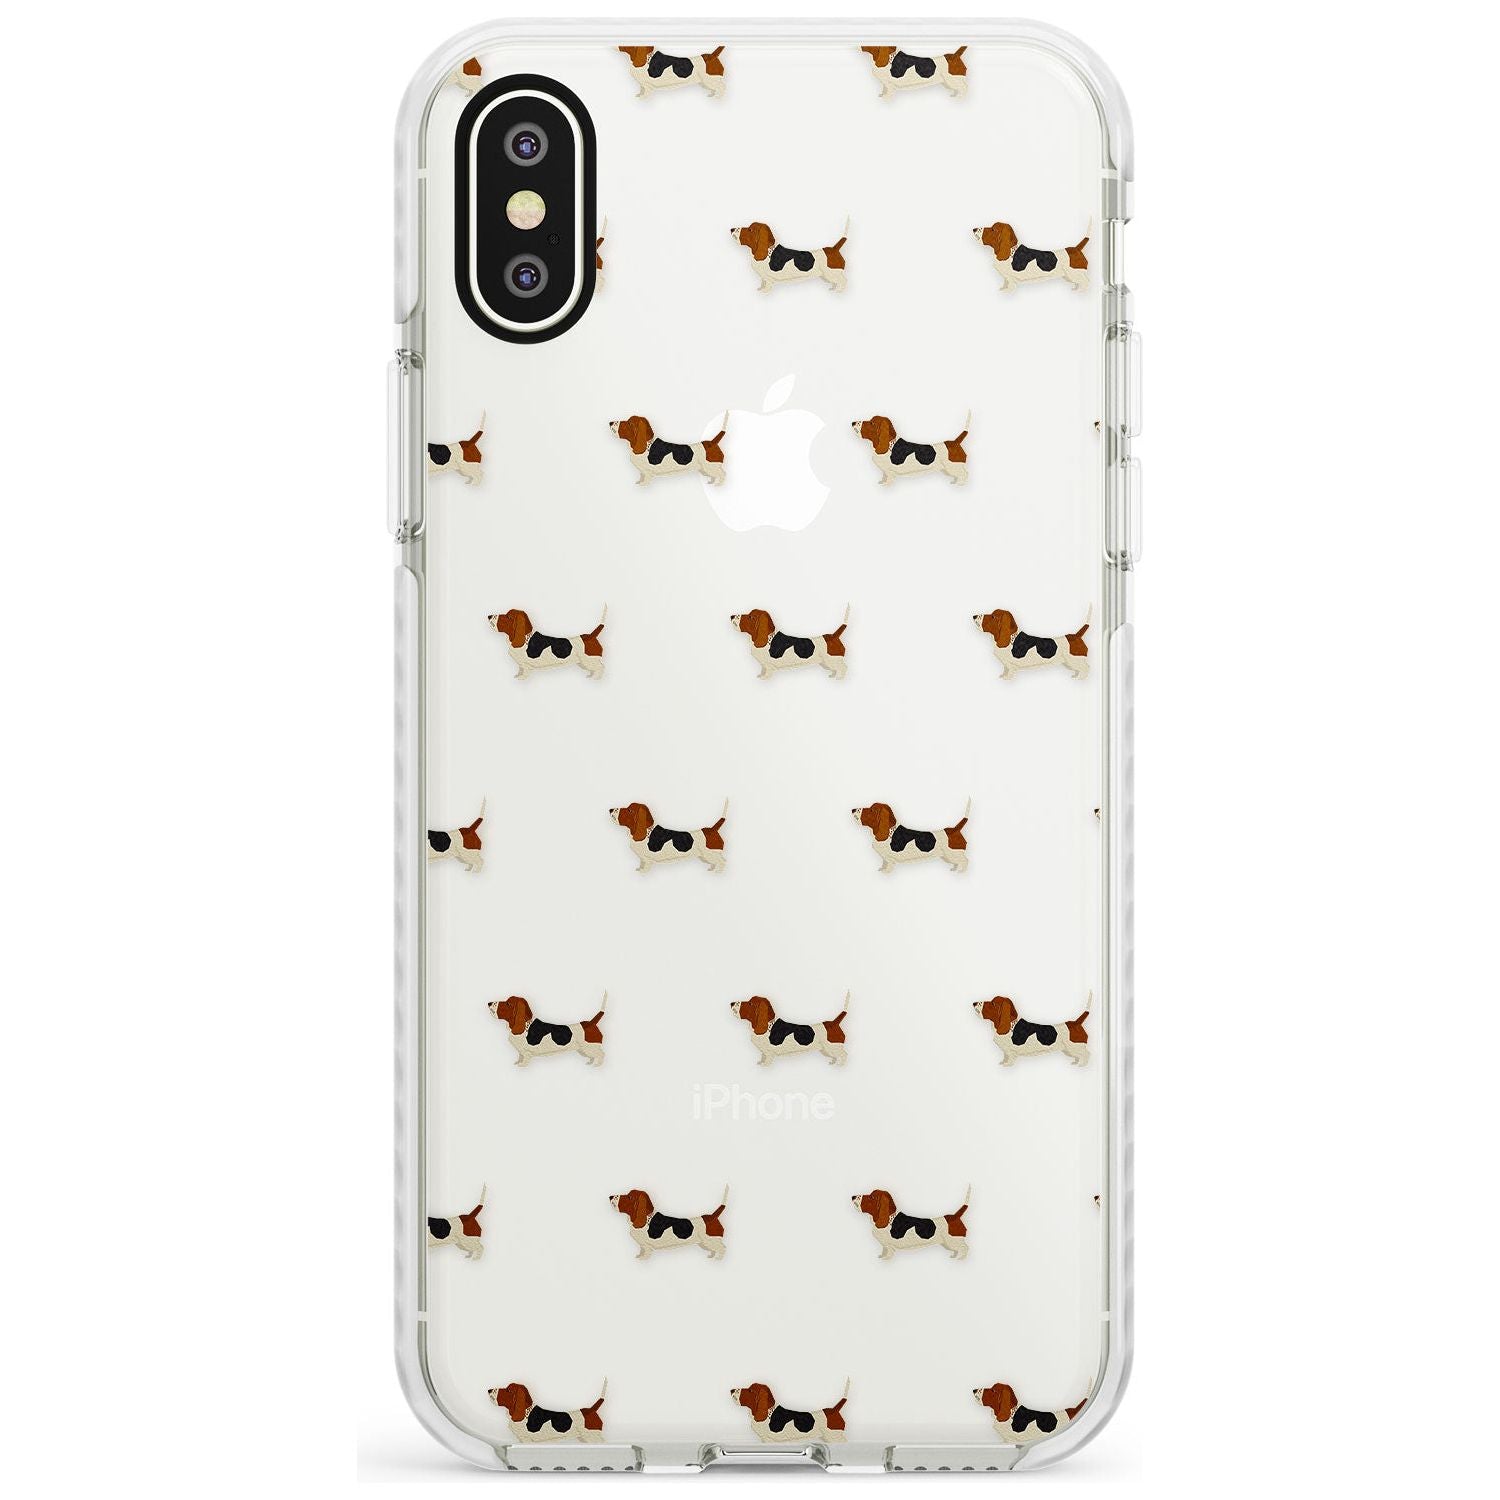 . Basset Hound Dog Pattern Clear Impact Phone Case for iPhone X XS Max XR